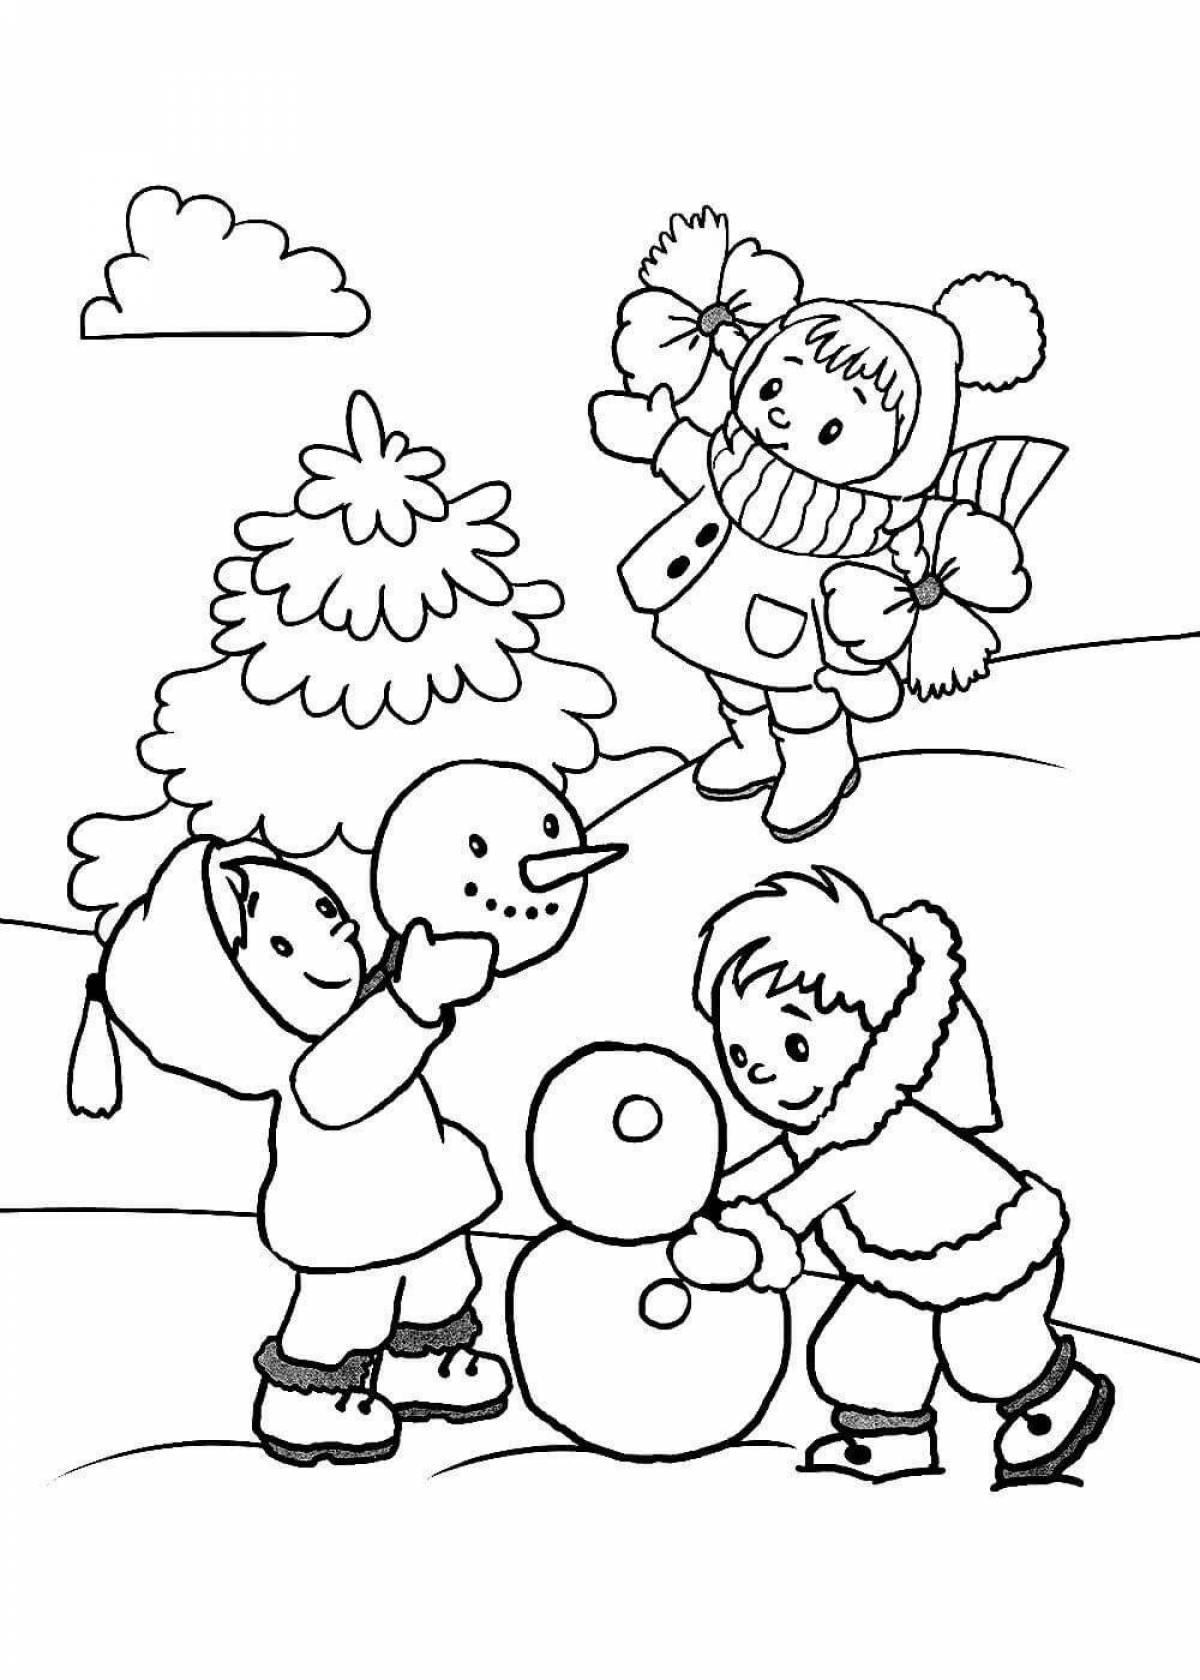 Animated snowball fight coloring book for kids